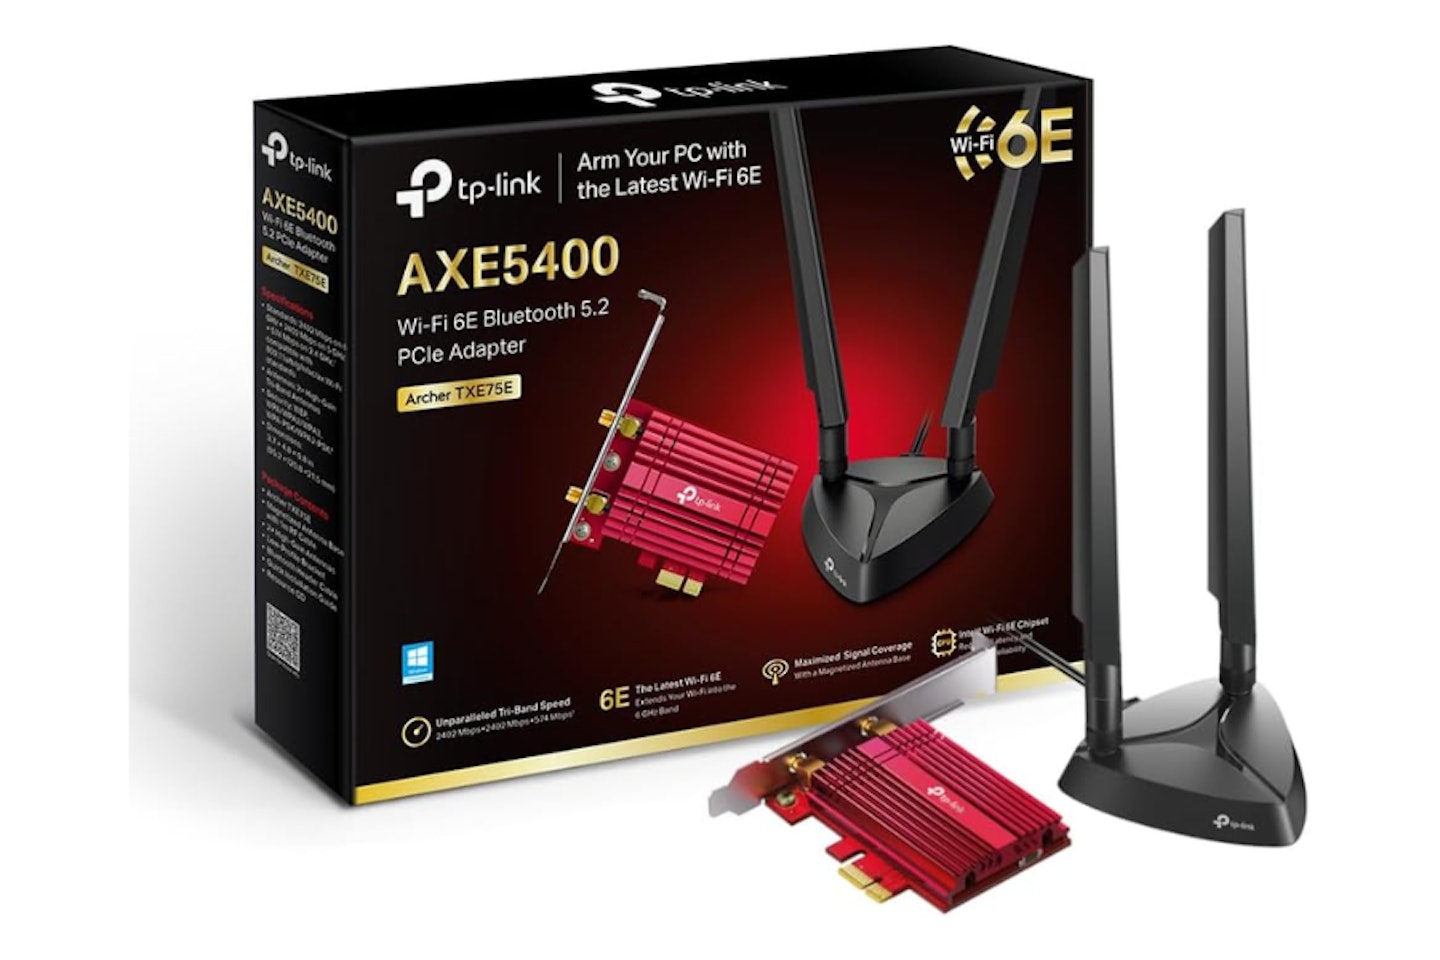 TP-Link AXE5400 Tri-Band Wi-Fi 6E Bluetooth 5.2 PCI Express Adapter  - possibly the best wifi card for gaming